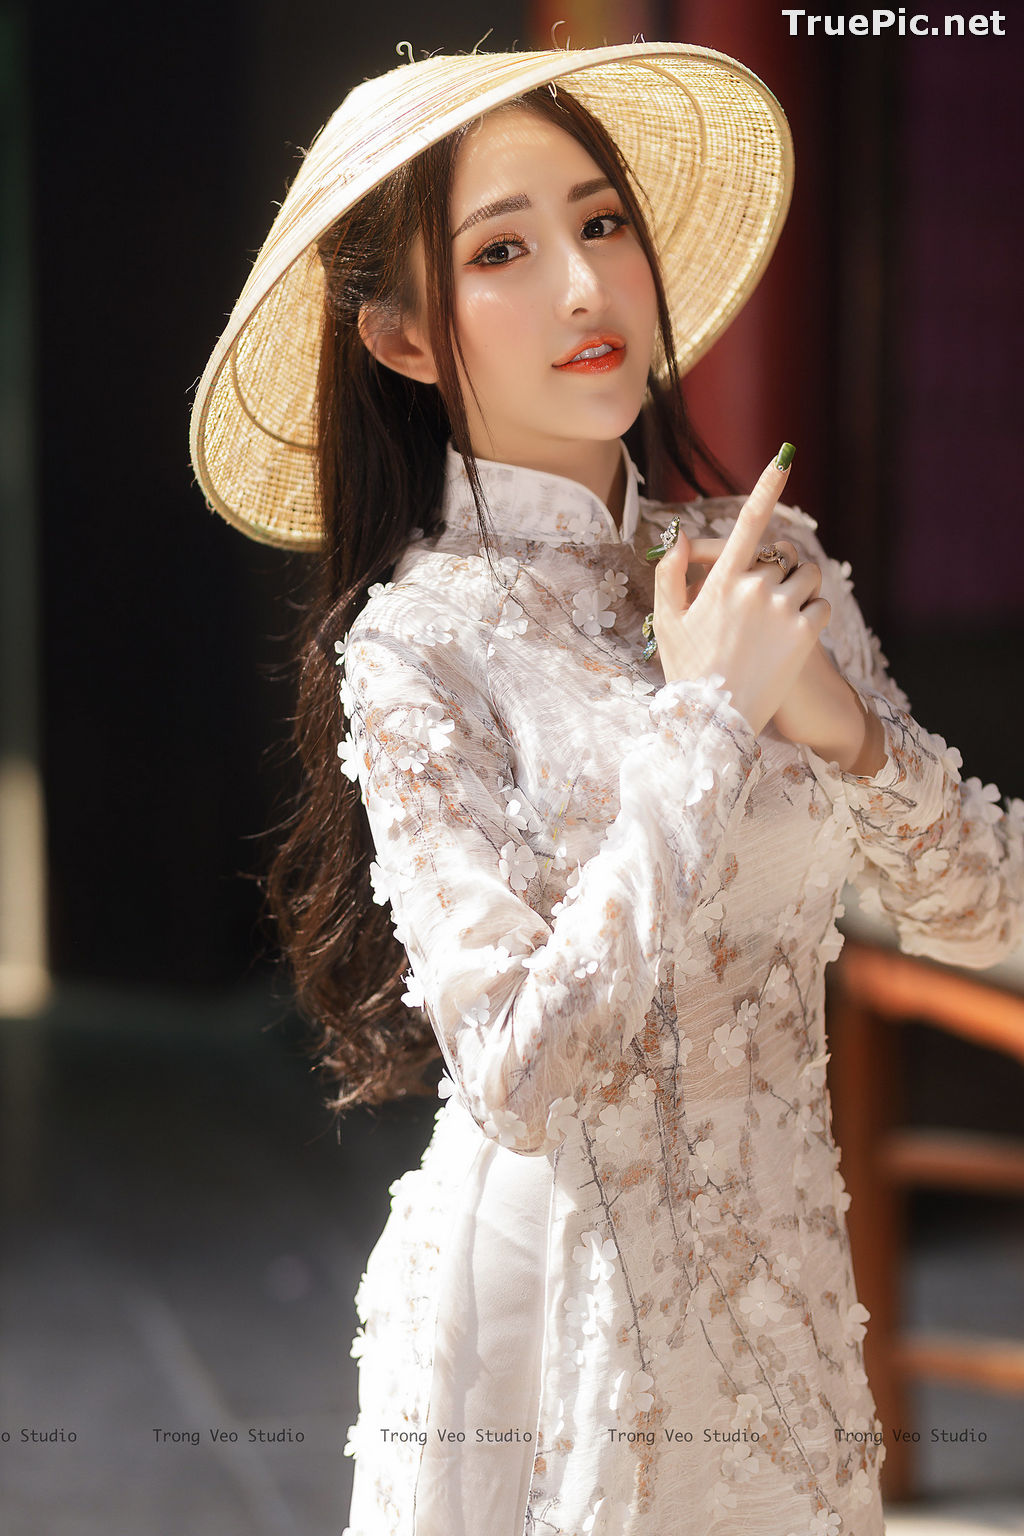 Image The Beauty of Vietnamese Girls with Traditional Dress (Ao Dai) #2 - TruePic.net - Picture-18